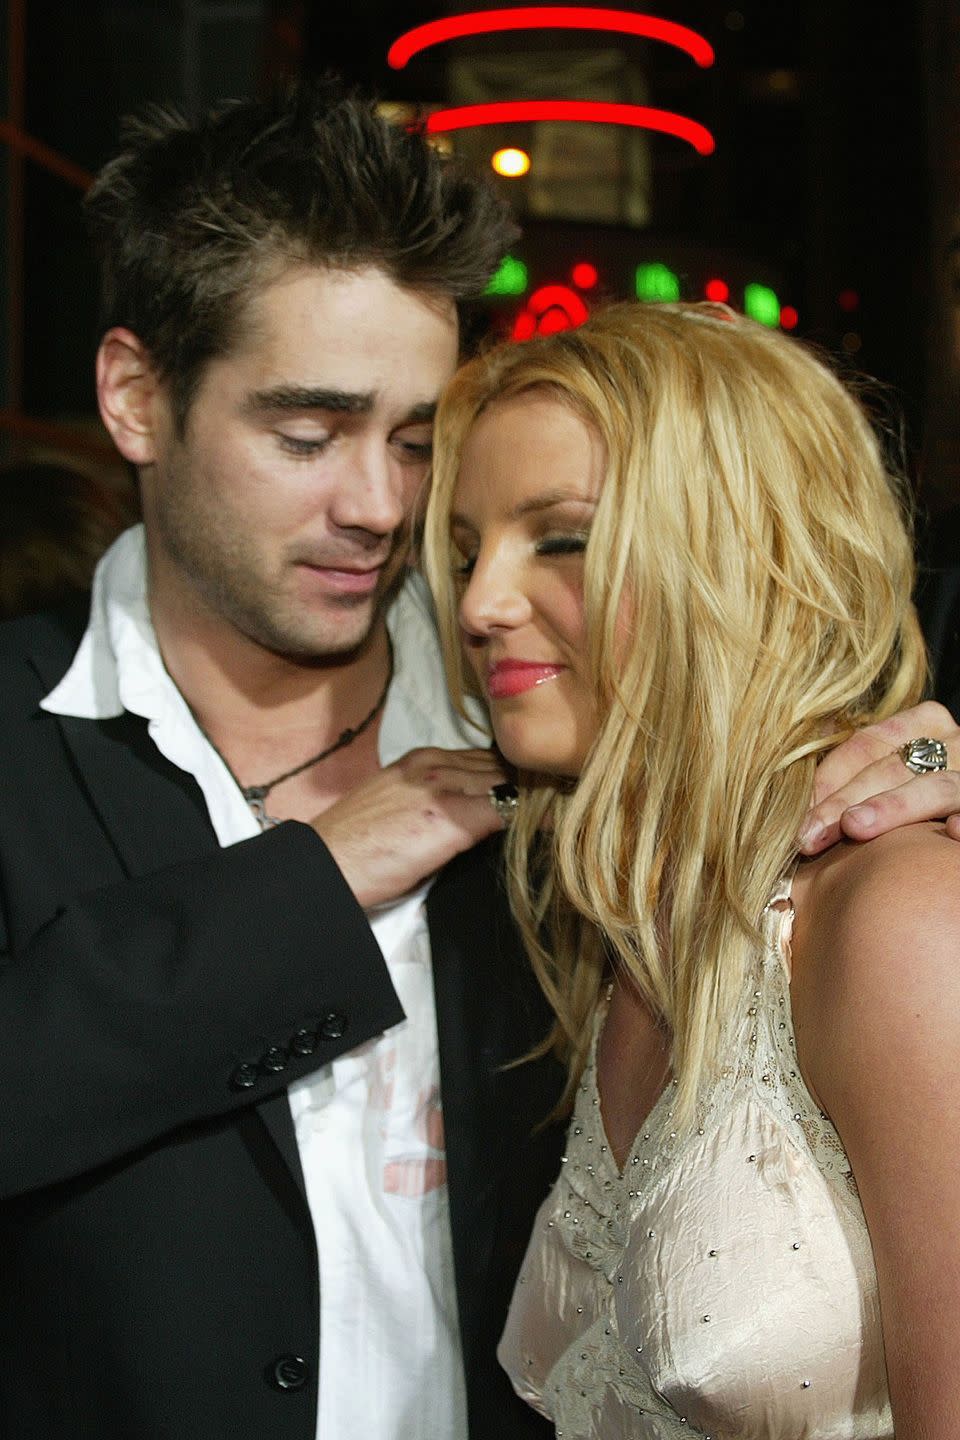 Colin Farrell and Britney Spears